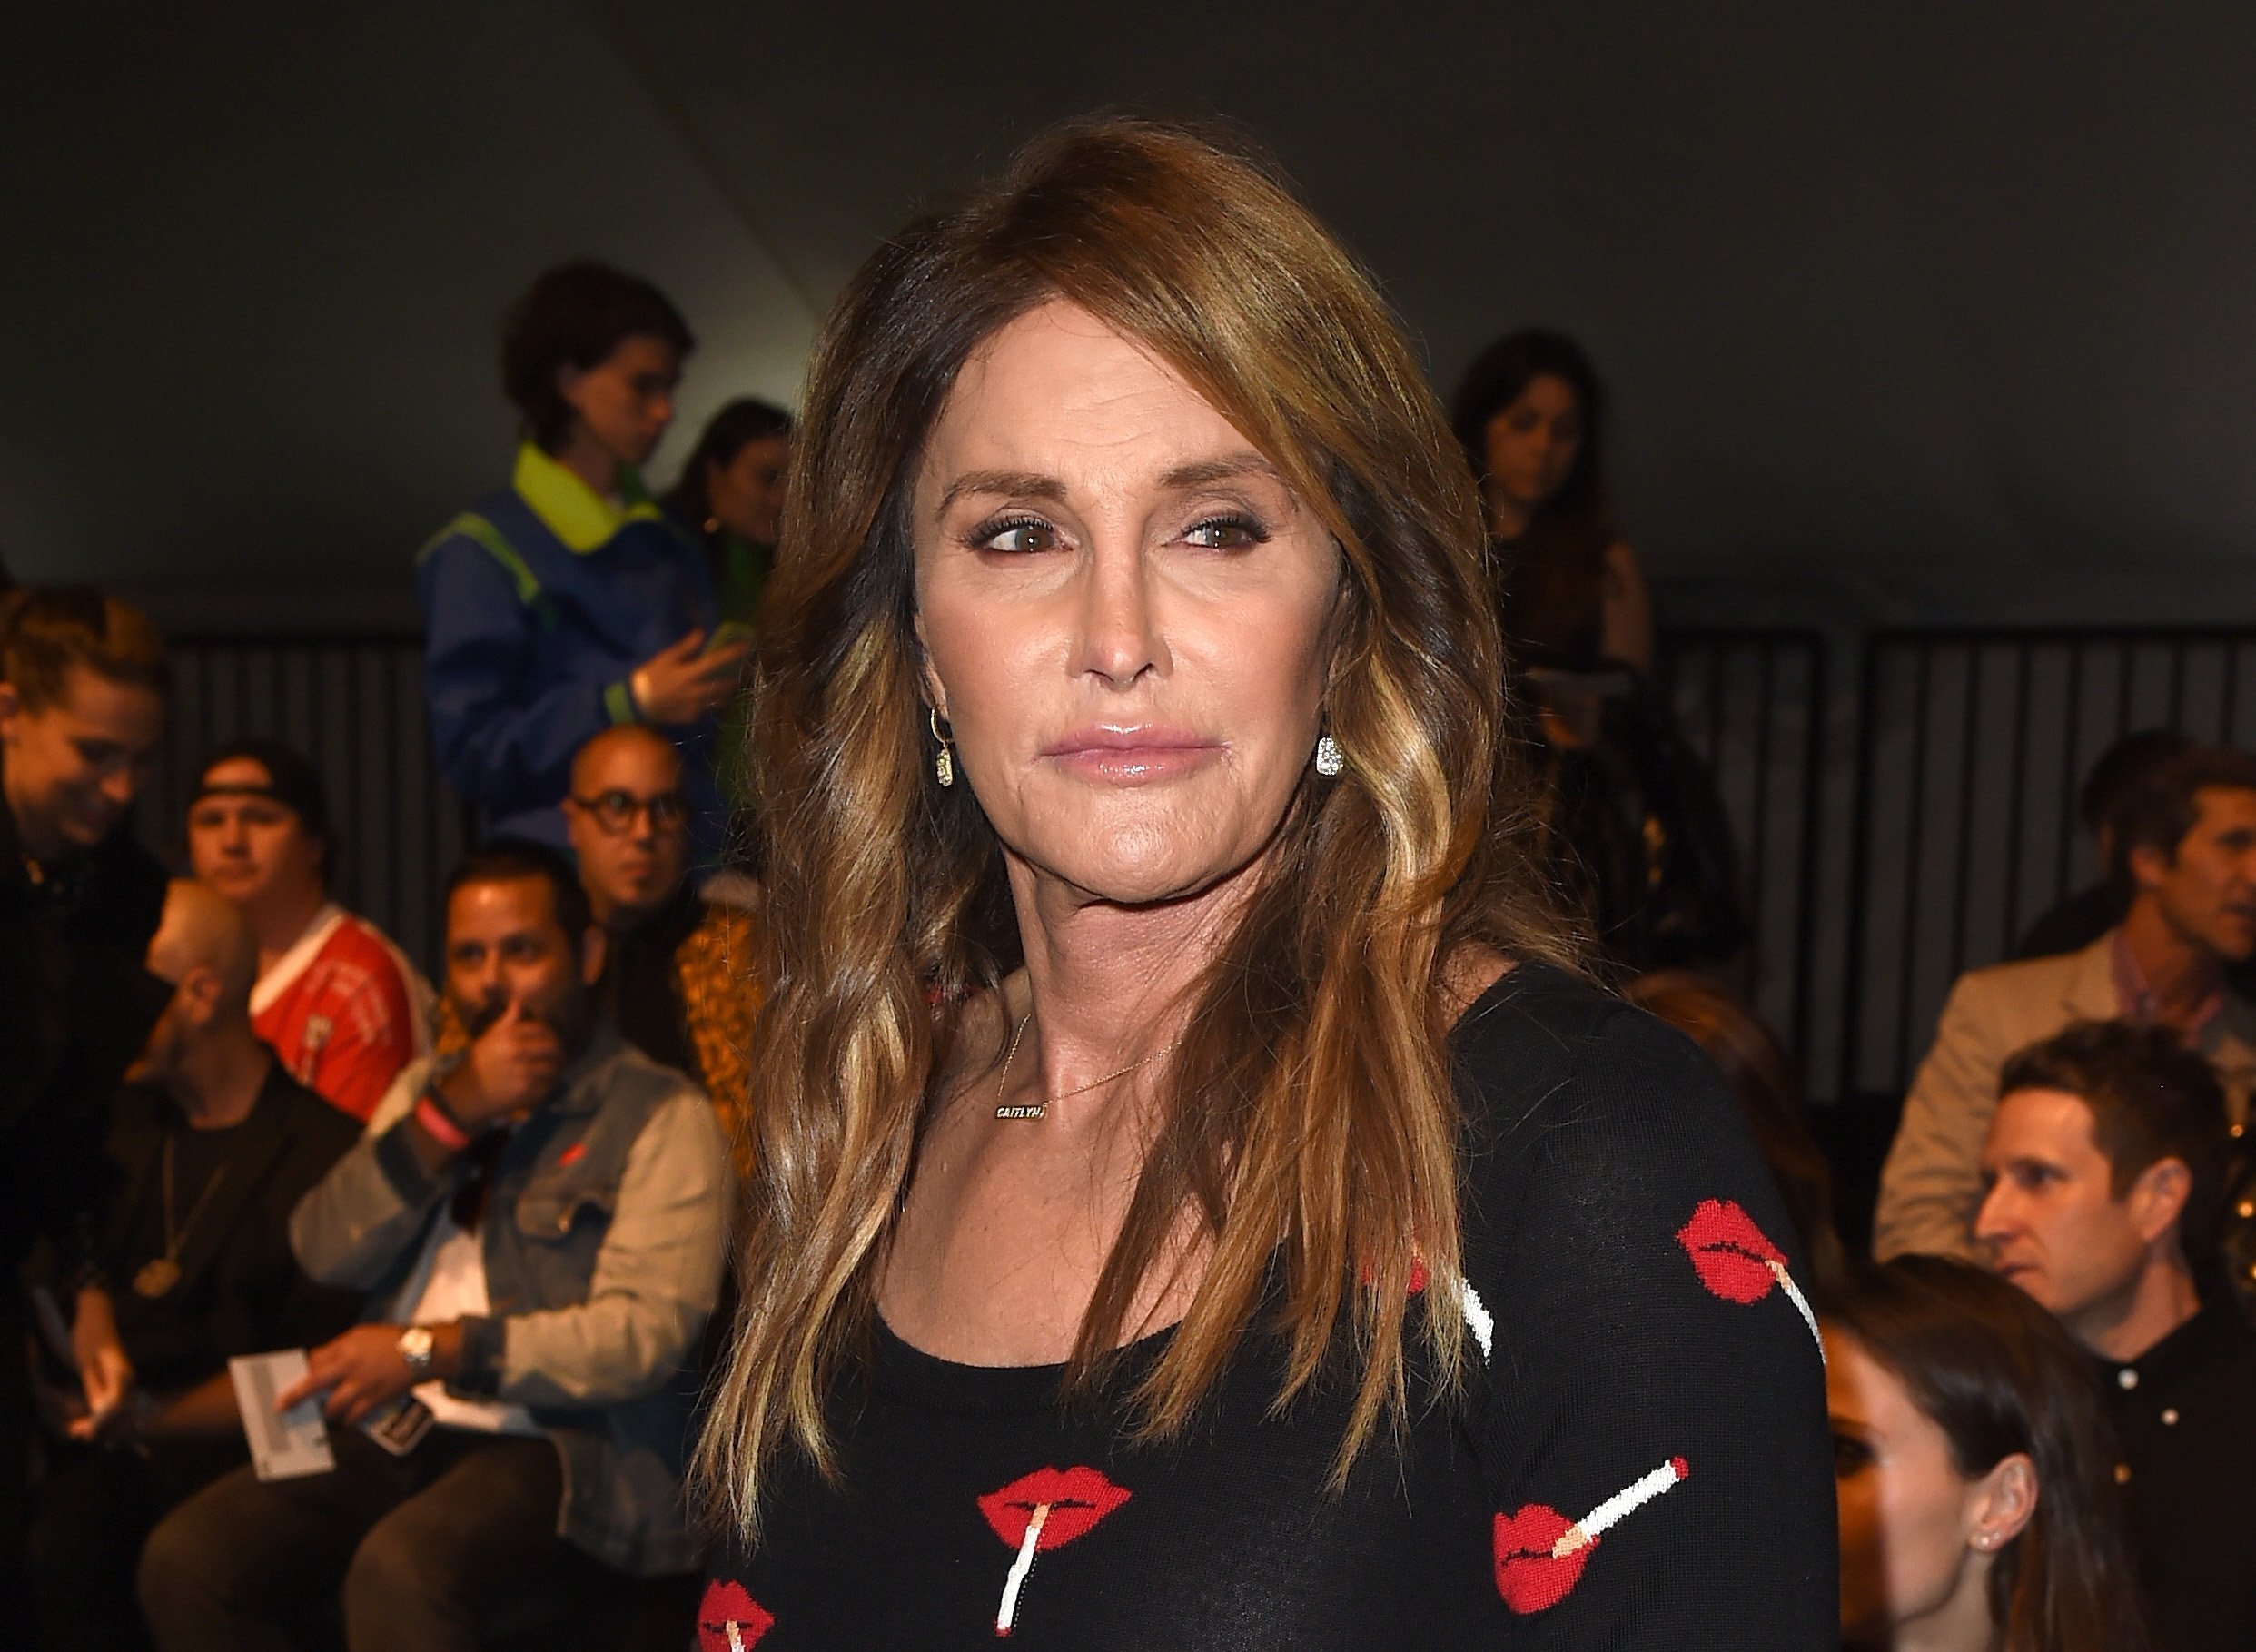 Caitlyn Jenner attends the "MADE LA at L.A" live event deck on June 10, 2016 . | Source: Getty Images